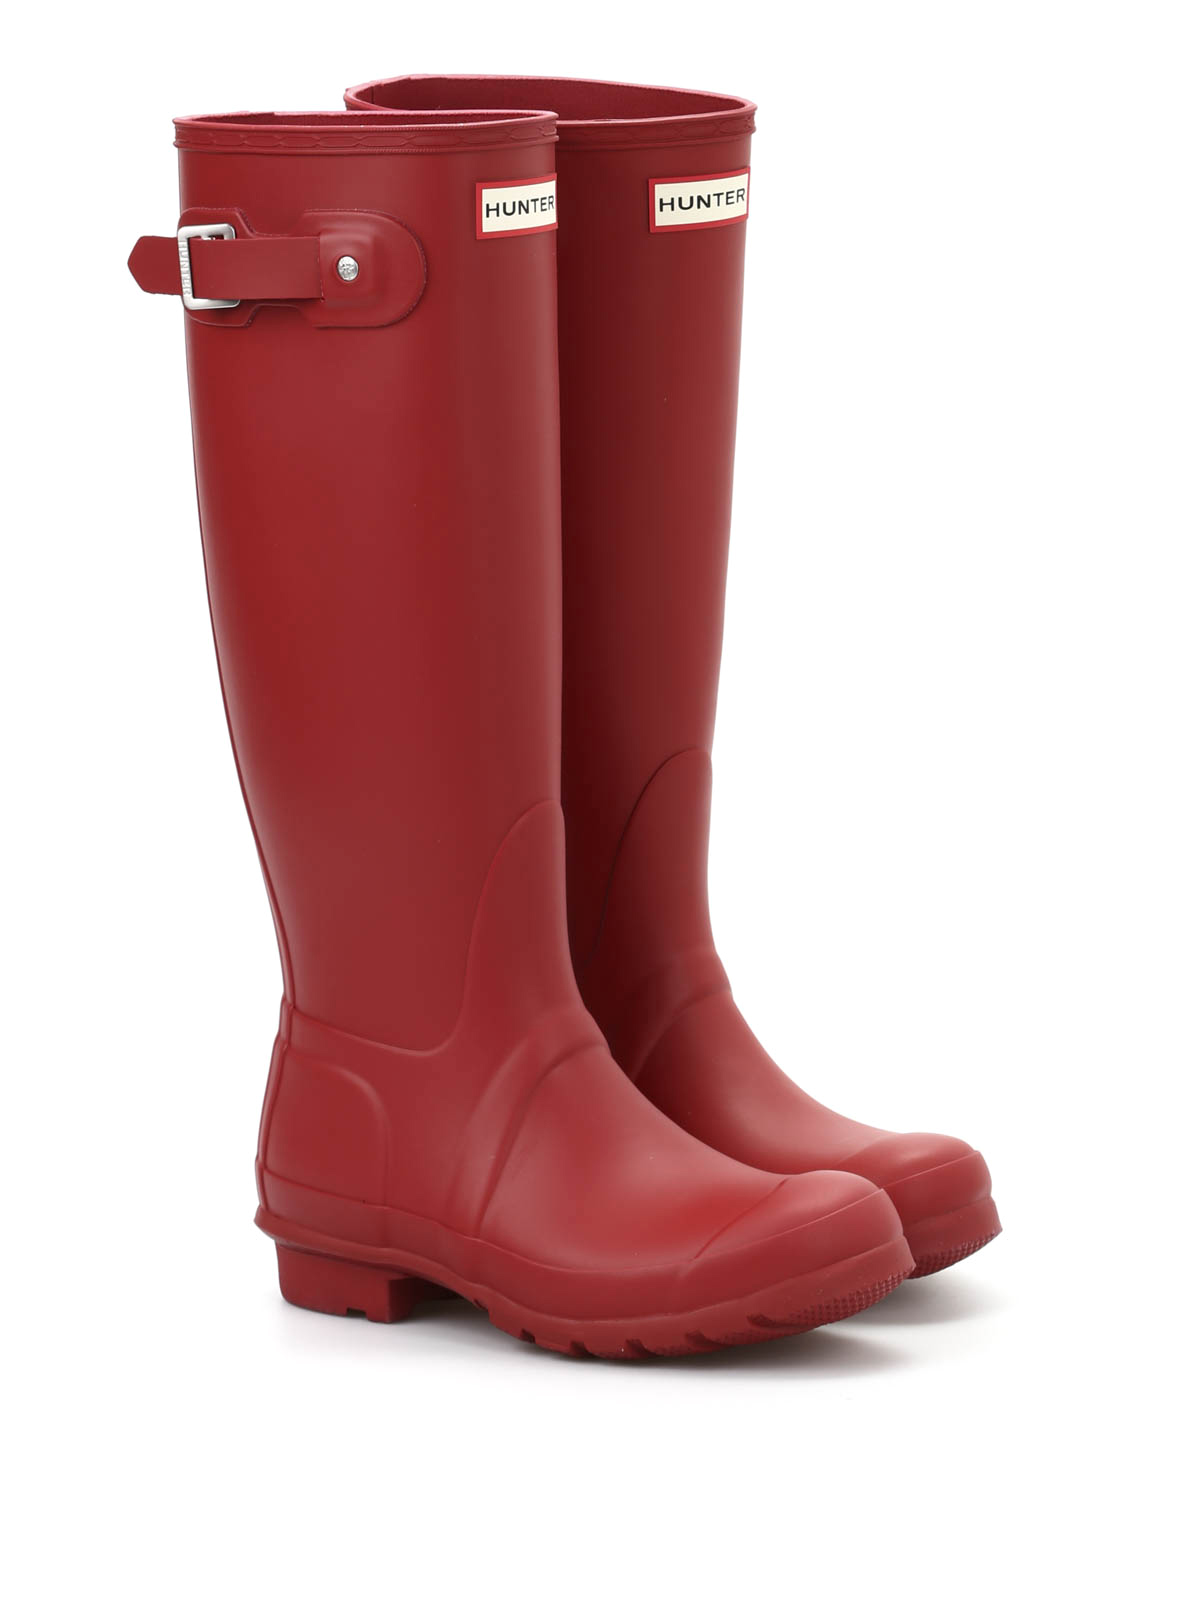 Hunter - Waterproof rubber boots - boots - WFT1000RMAMILITARYRED